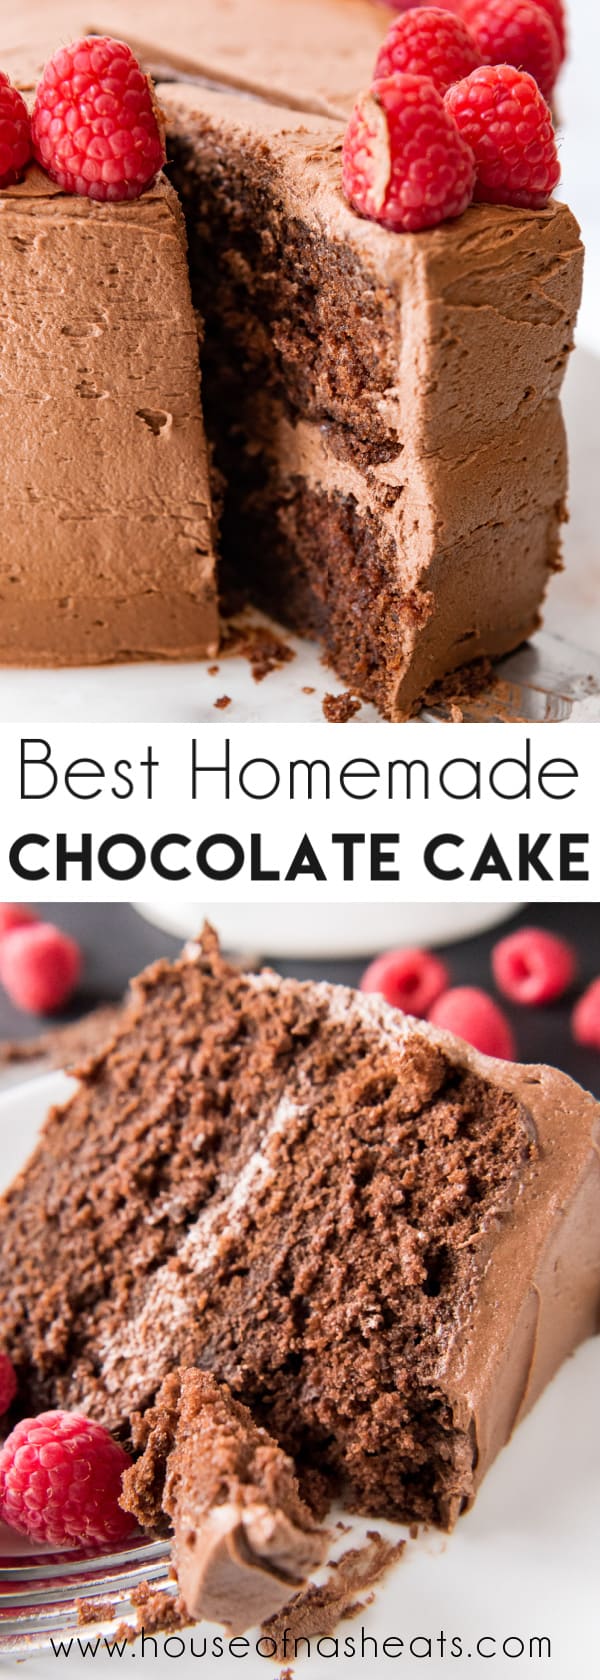 A collage of chocolate cake images with text overlay.